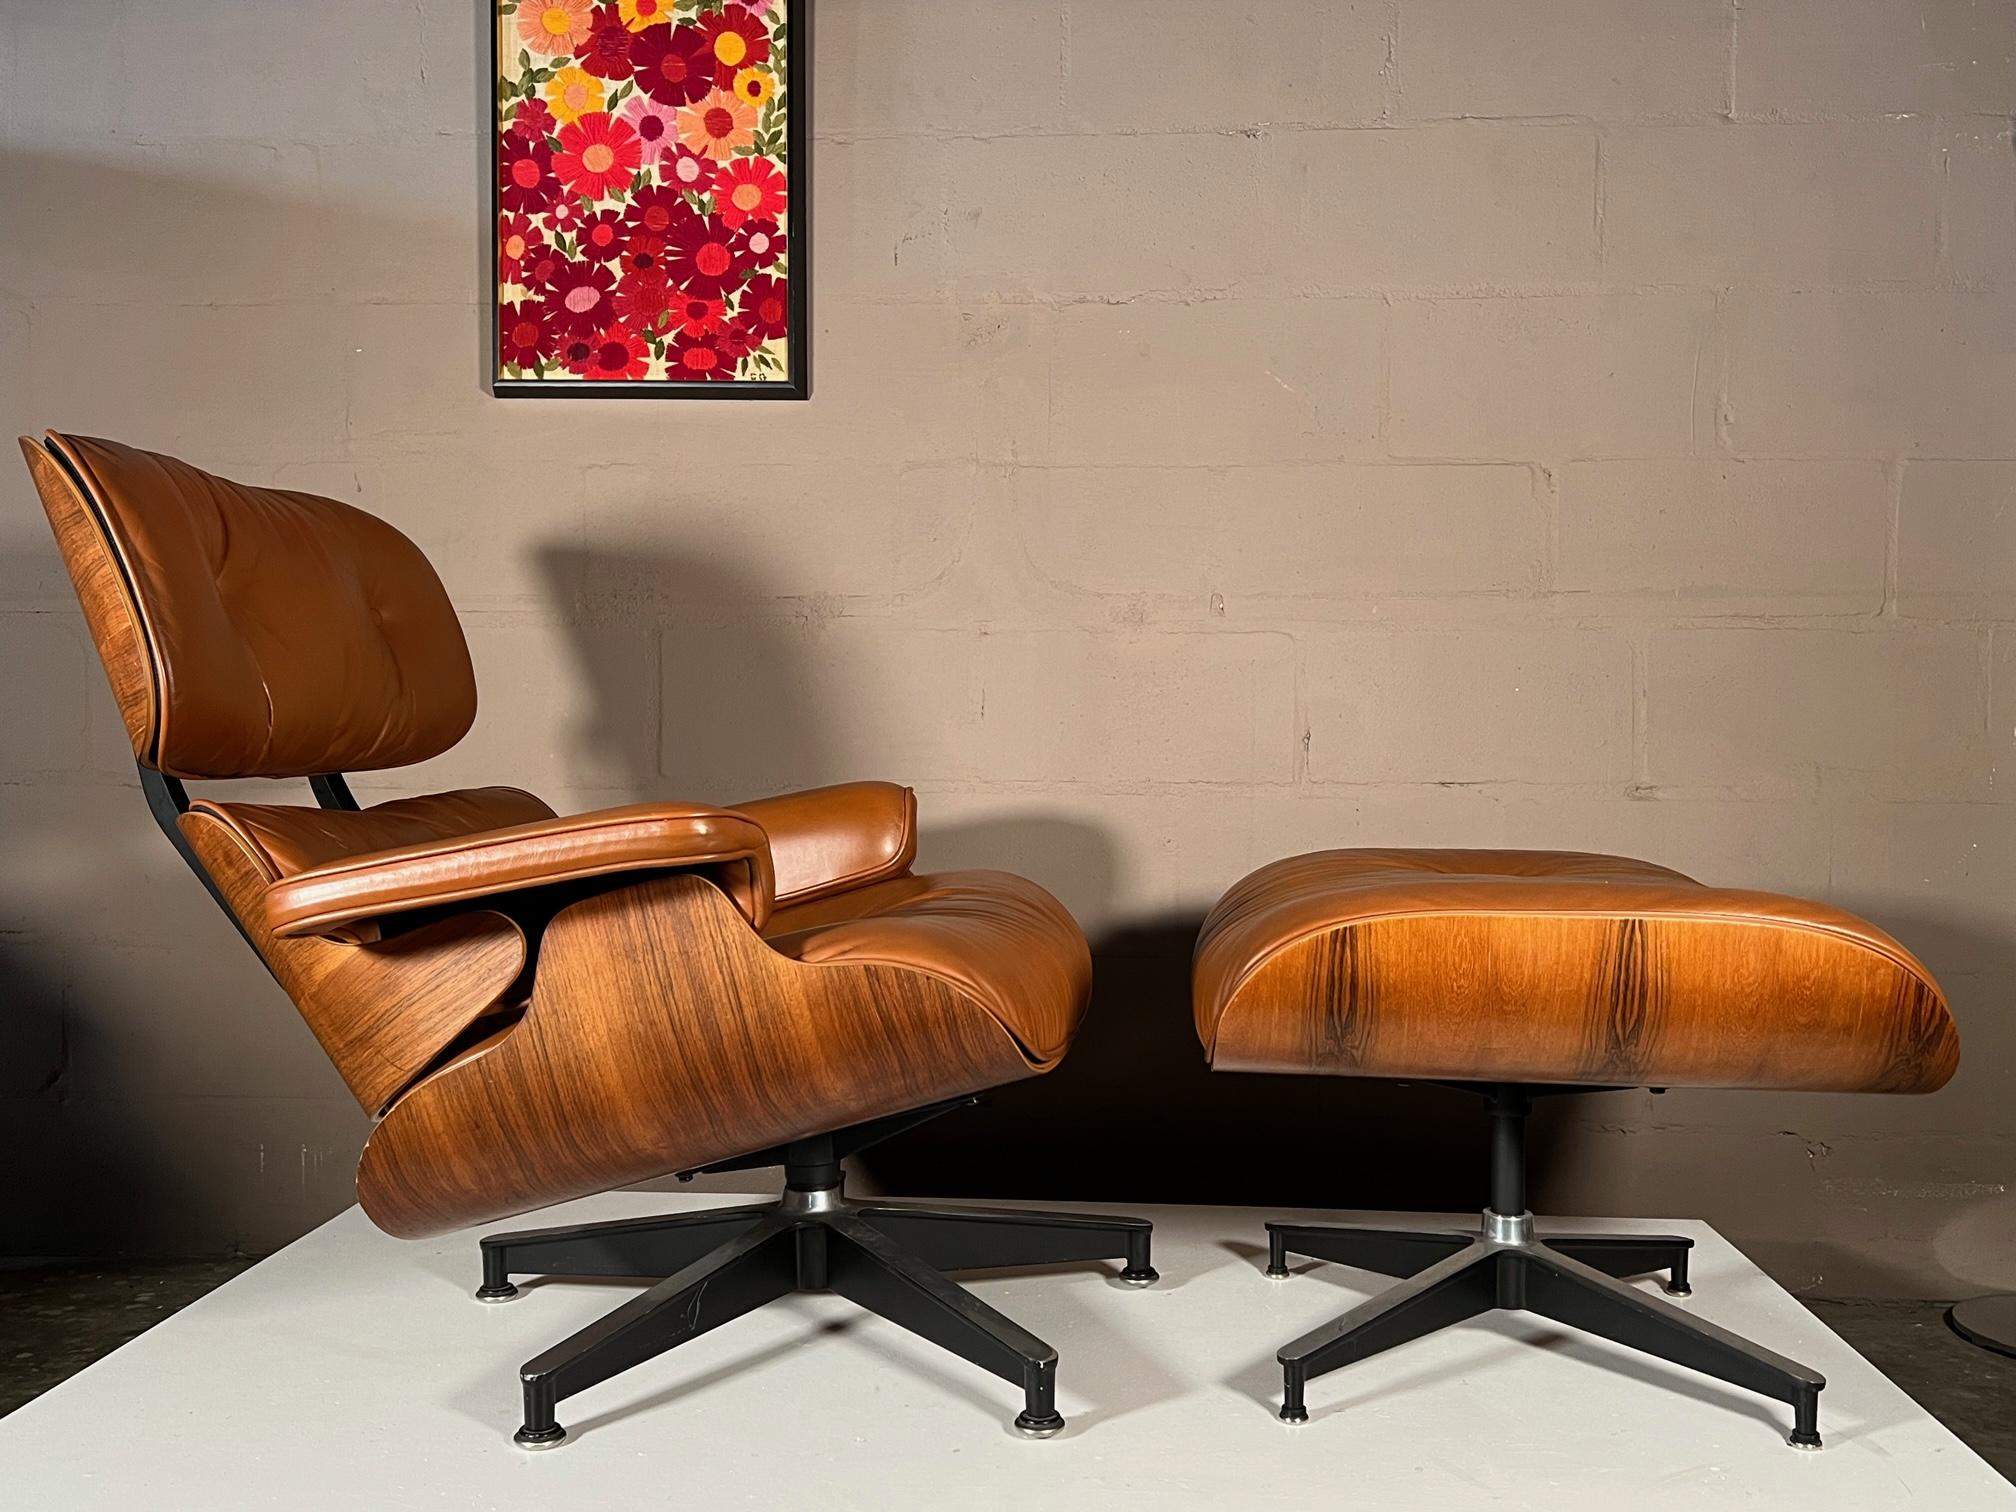 Beautiful Charles Eames, Herman Miller lounger chair and ottoman, 1984's. Original cognac brown leather and rosewood with nice graining. The chair has a lightly worn feel with lovely patina. The brown leather has an orange/cognac color.